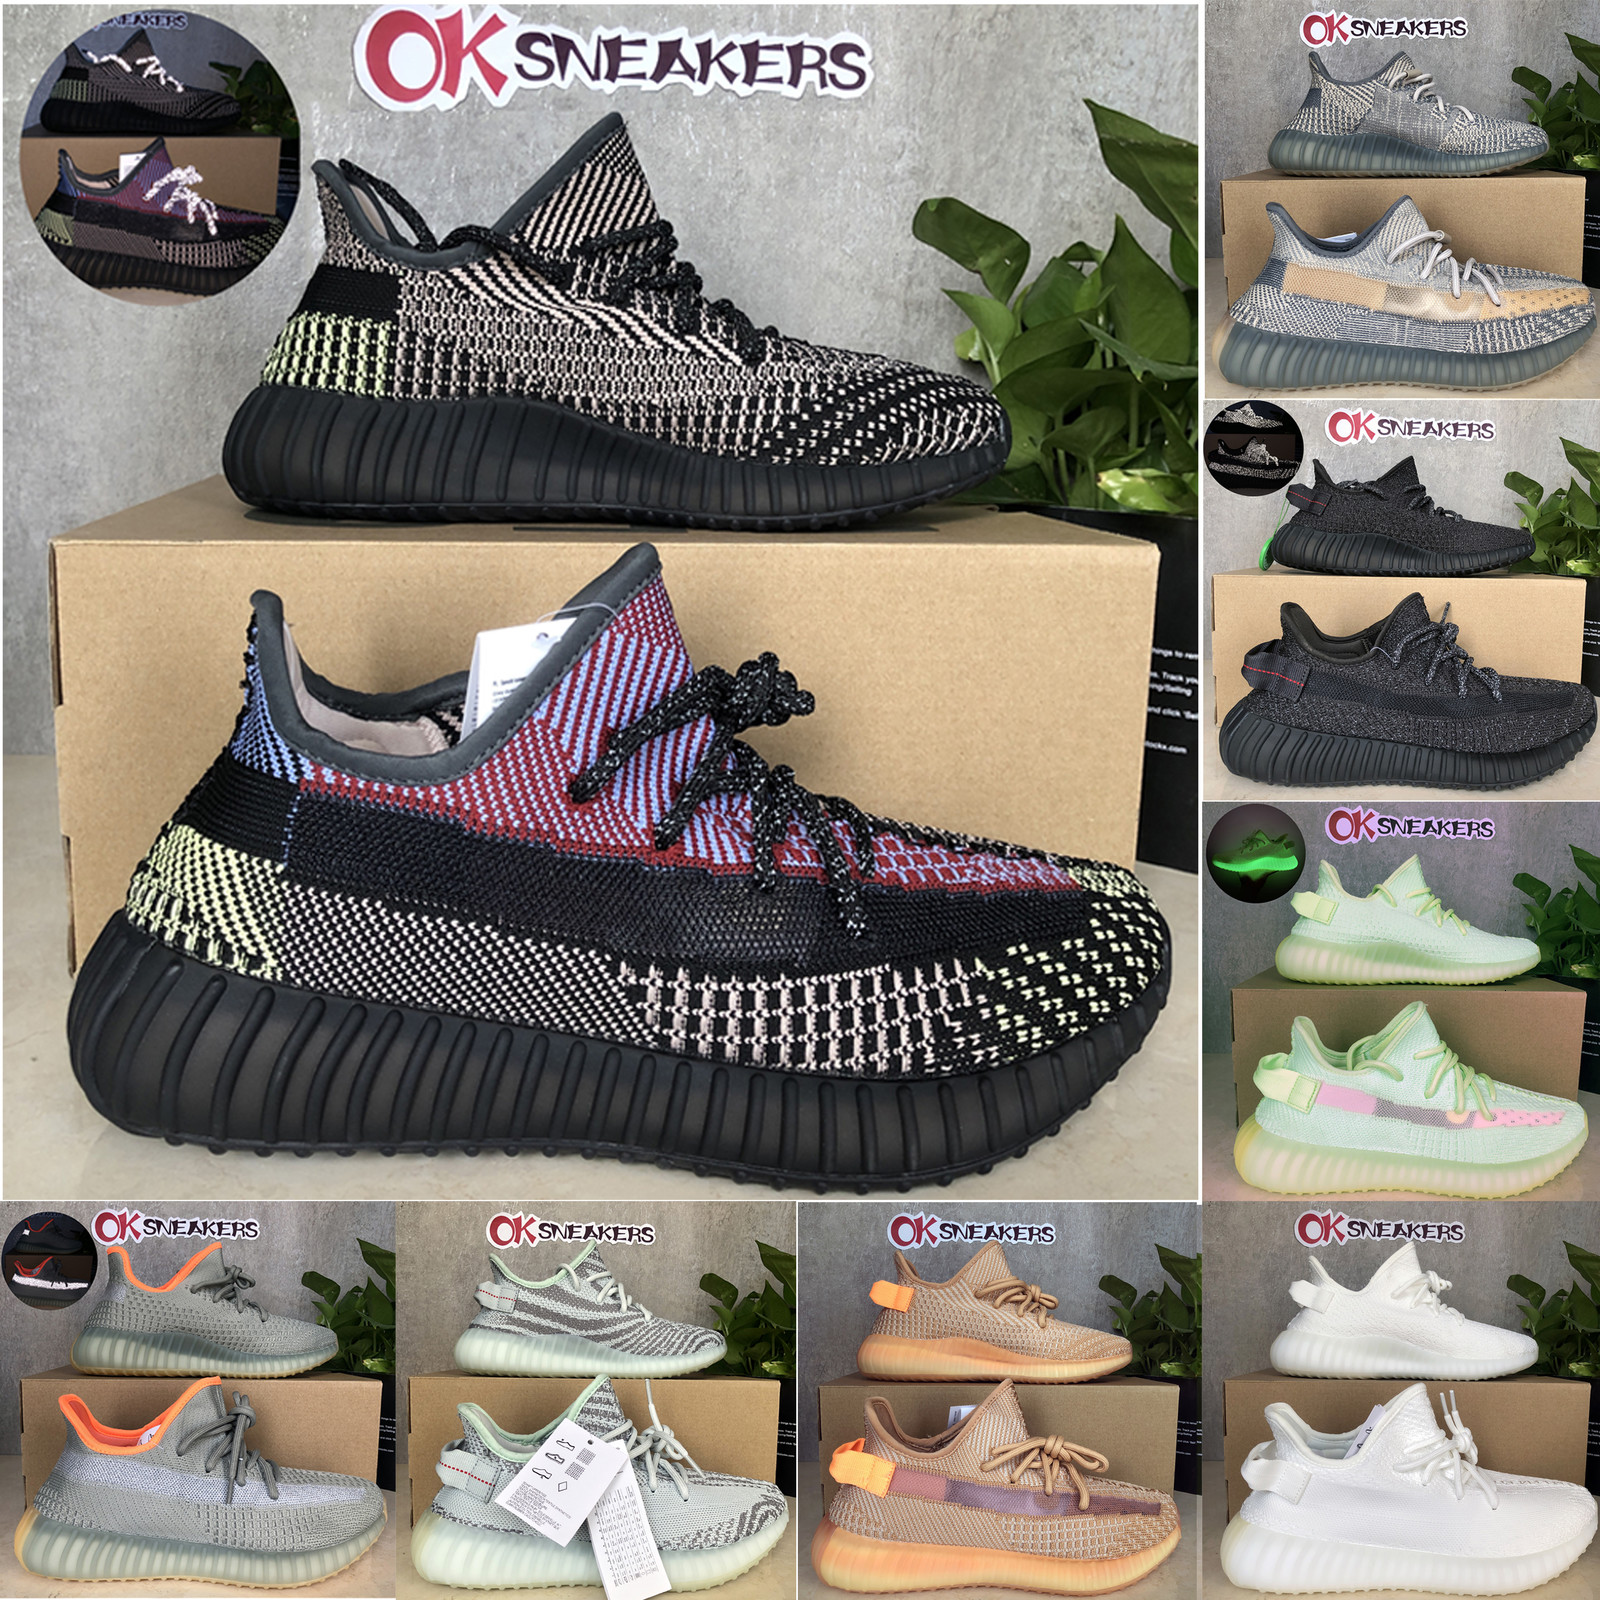 

Top quality 2021 Kanye West Cinder Yecheil Bred Oreo Desert Sage Earth Linen Asriel Zebra Trainers Sneakers MenWomen Running Shoes Size36-48